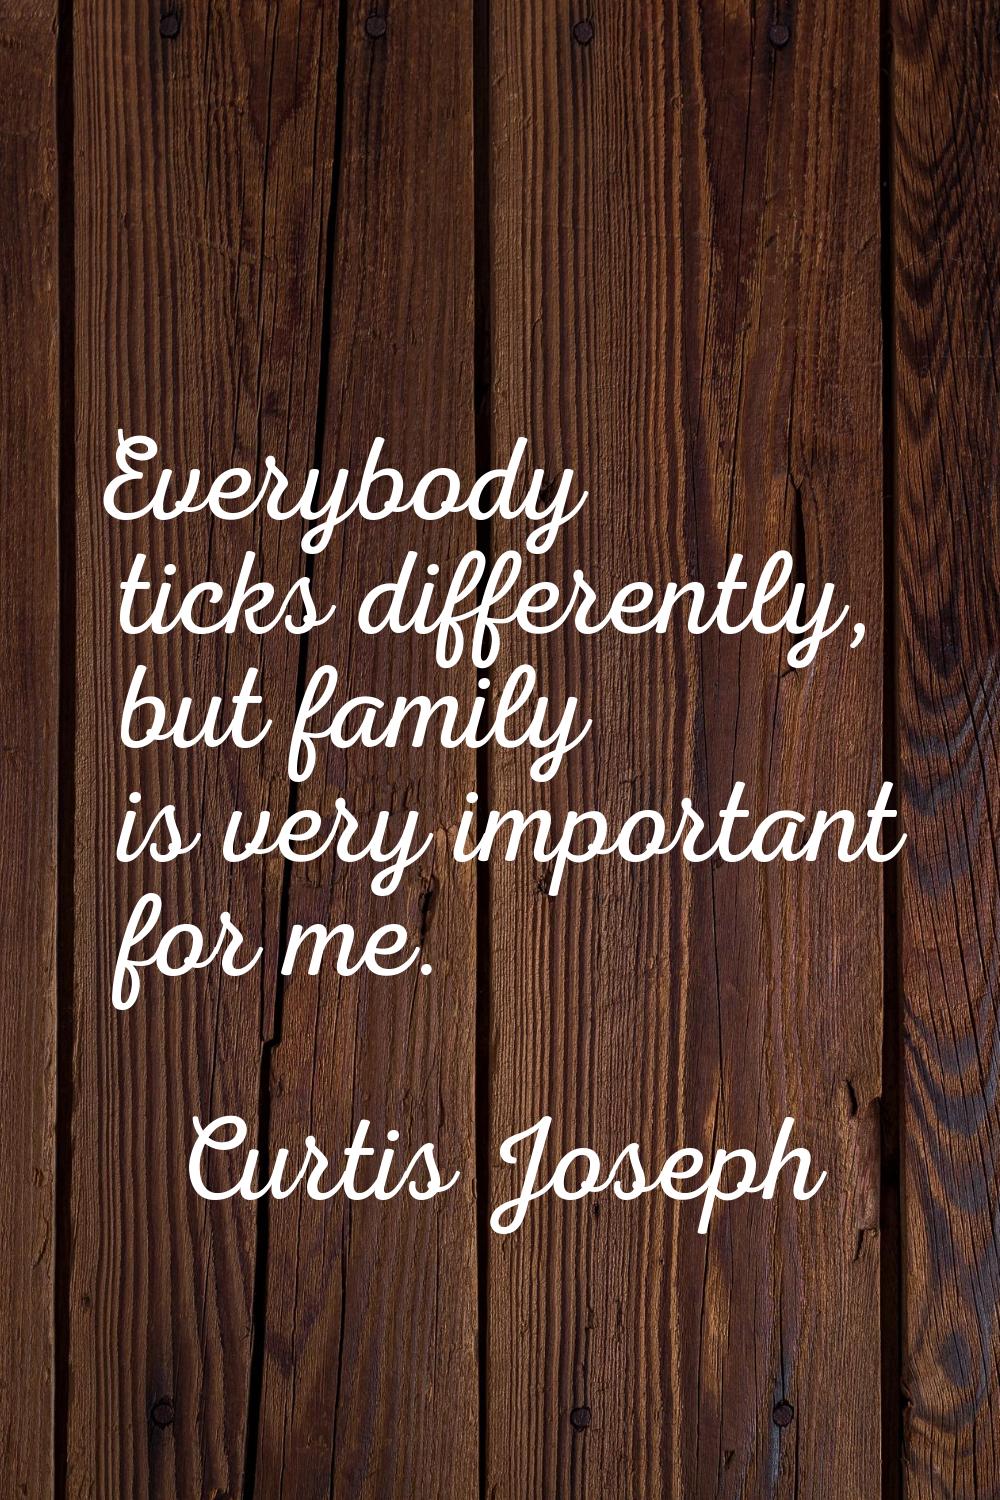 Everybody ticks differently, but family is very important for me.